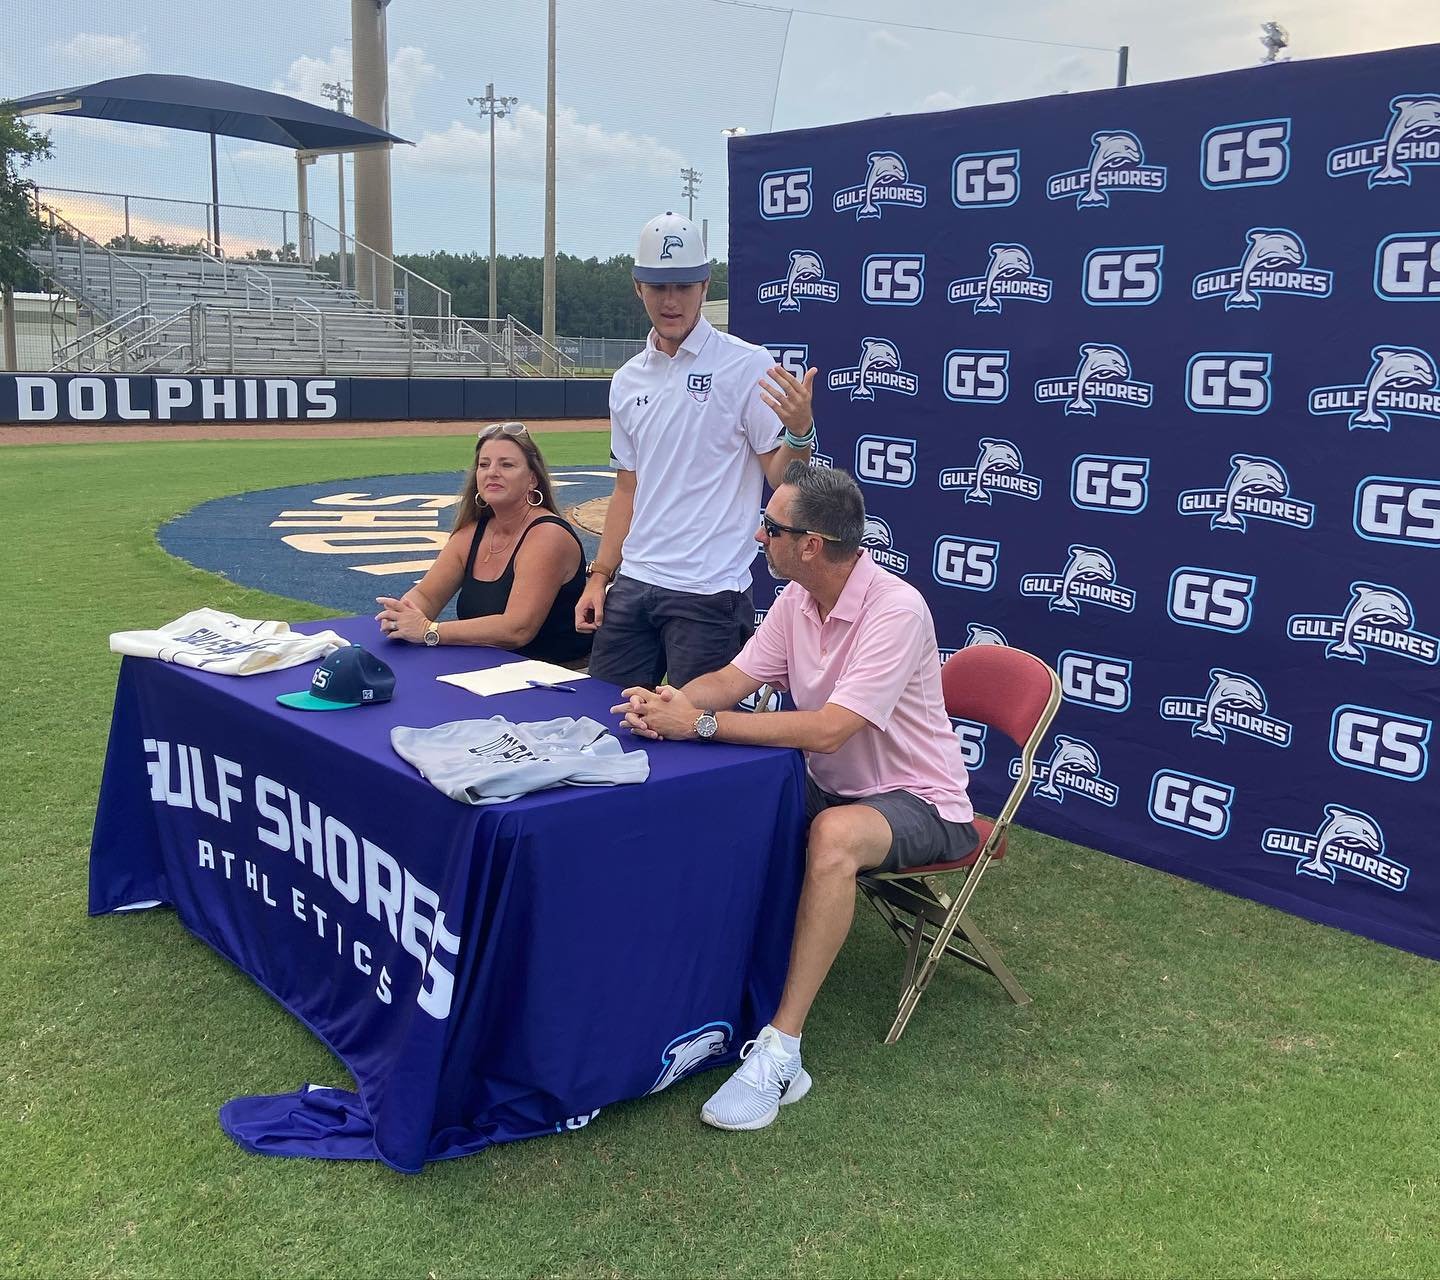 Noah Ayers was joined by his parents in signing to further his academic and athletic careers at Coastal Alabama Community College South during a Monday night ceremony at the Gulf Shores Sports Plex.